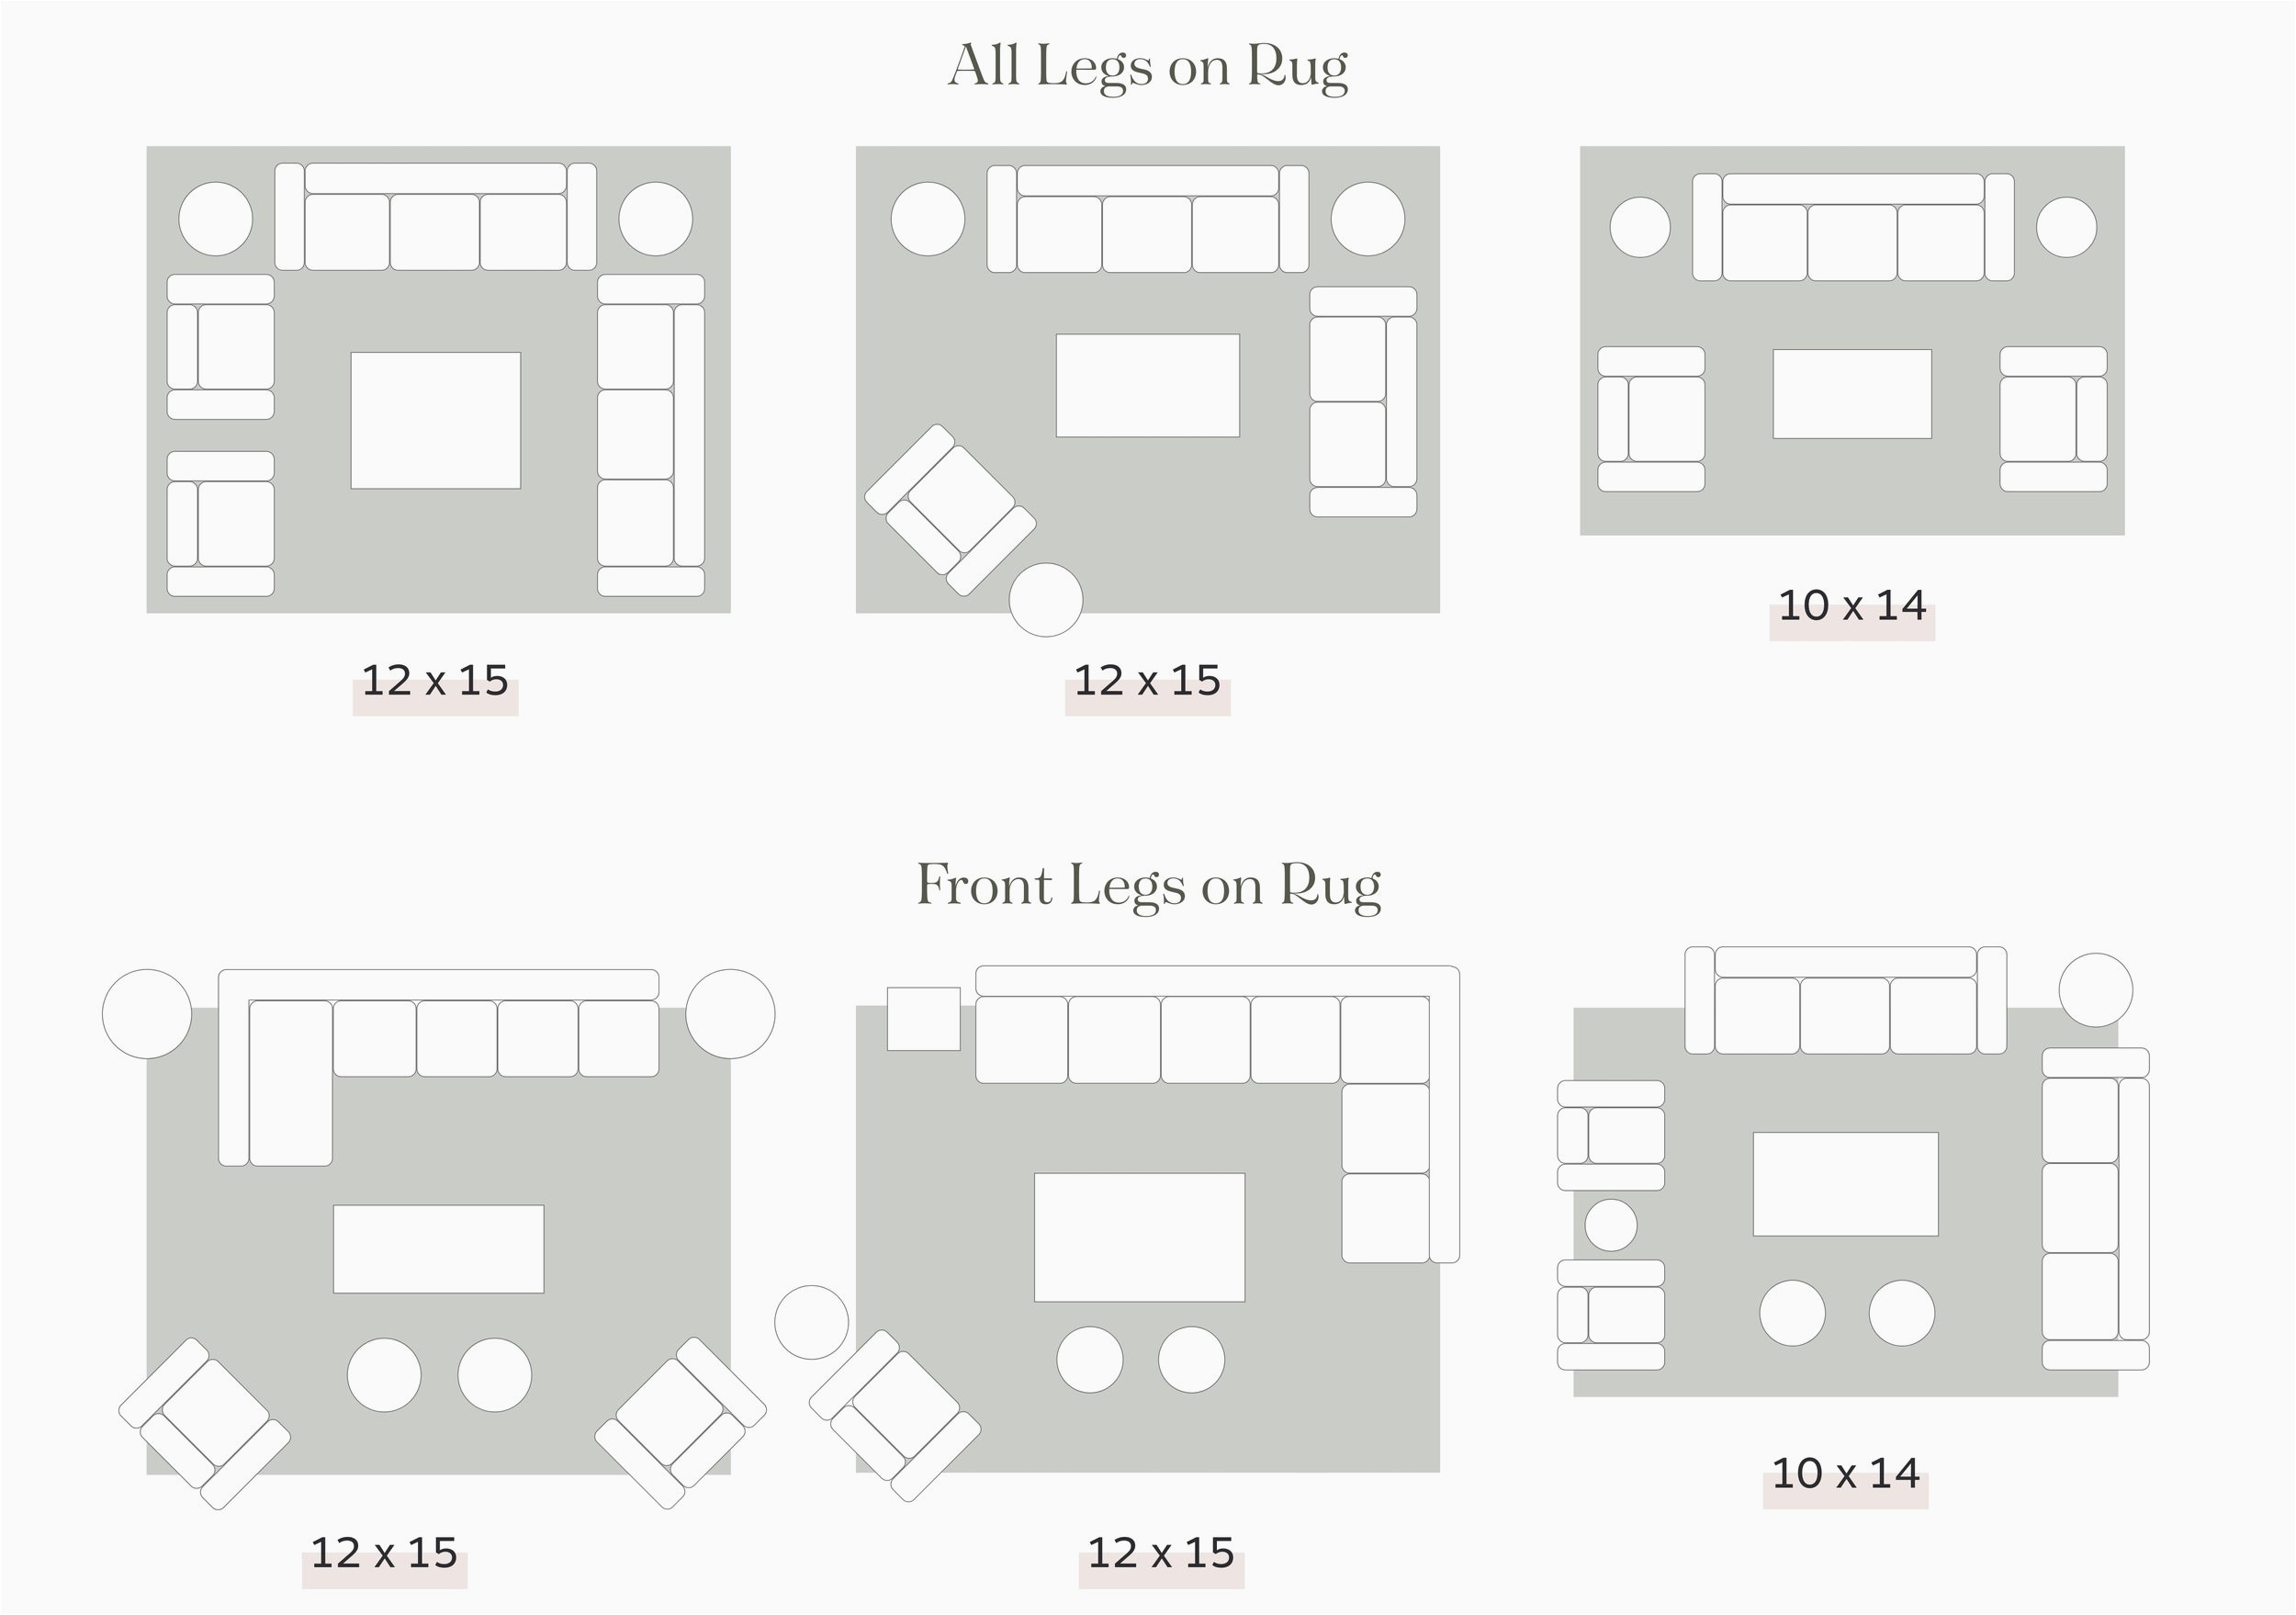 Area Rug Rules Living Room How to Choose the Right Size Rug for Your Space â Scout & Nimble